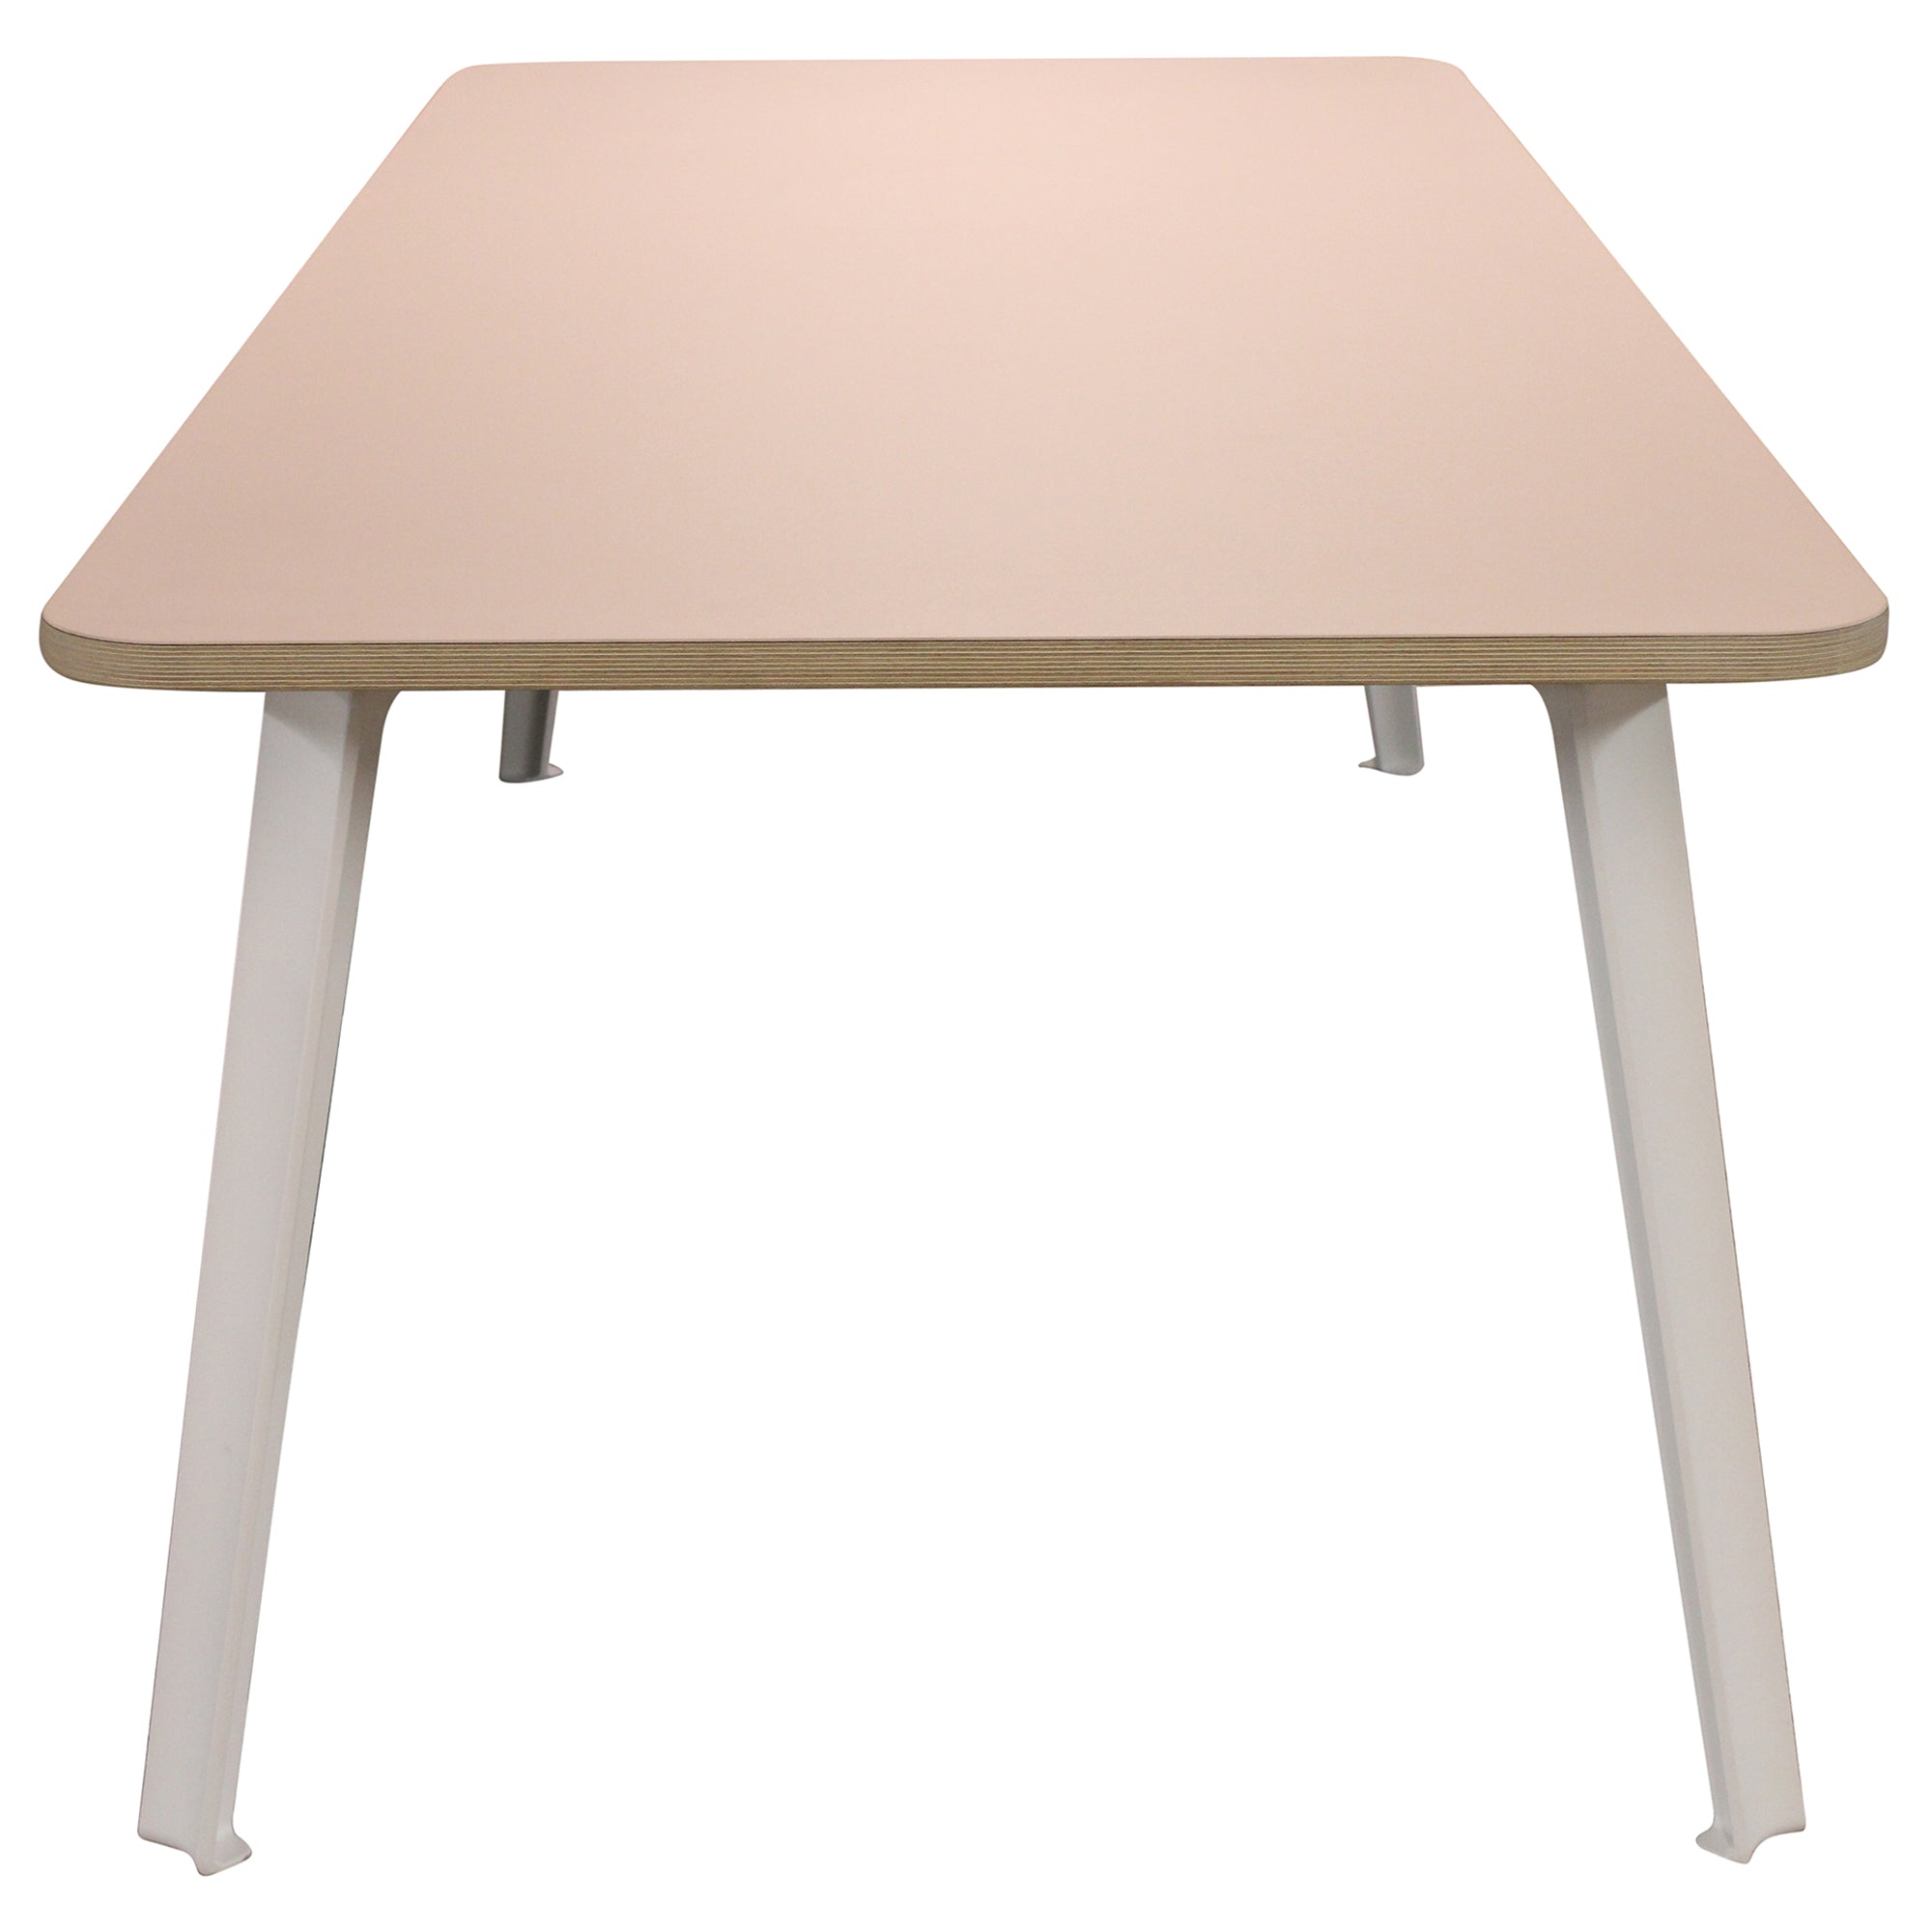 The Table by Floyd, 79in, Blush - Preowned